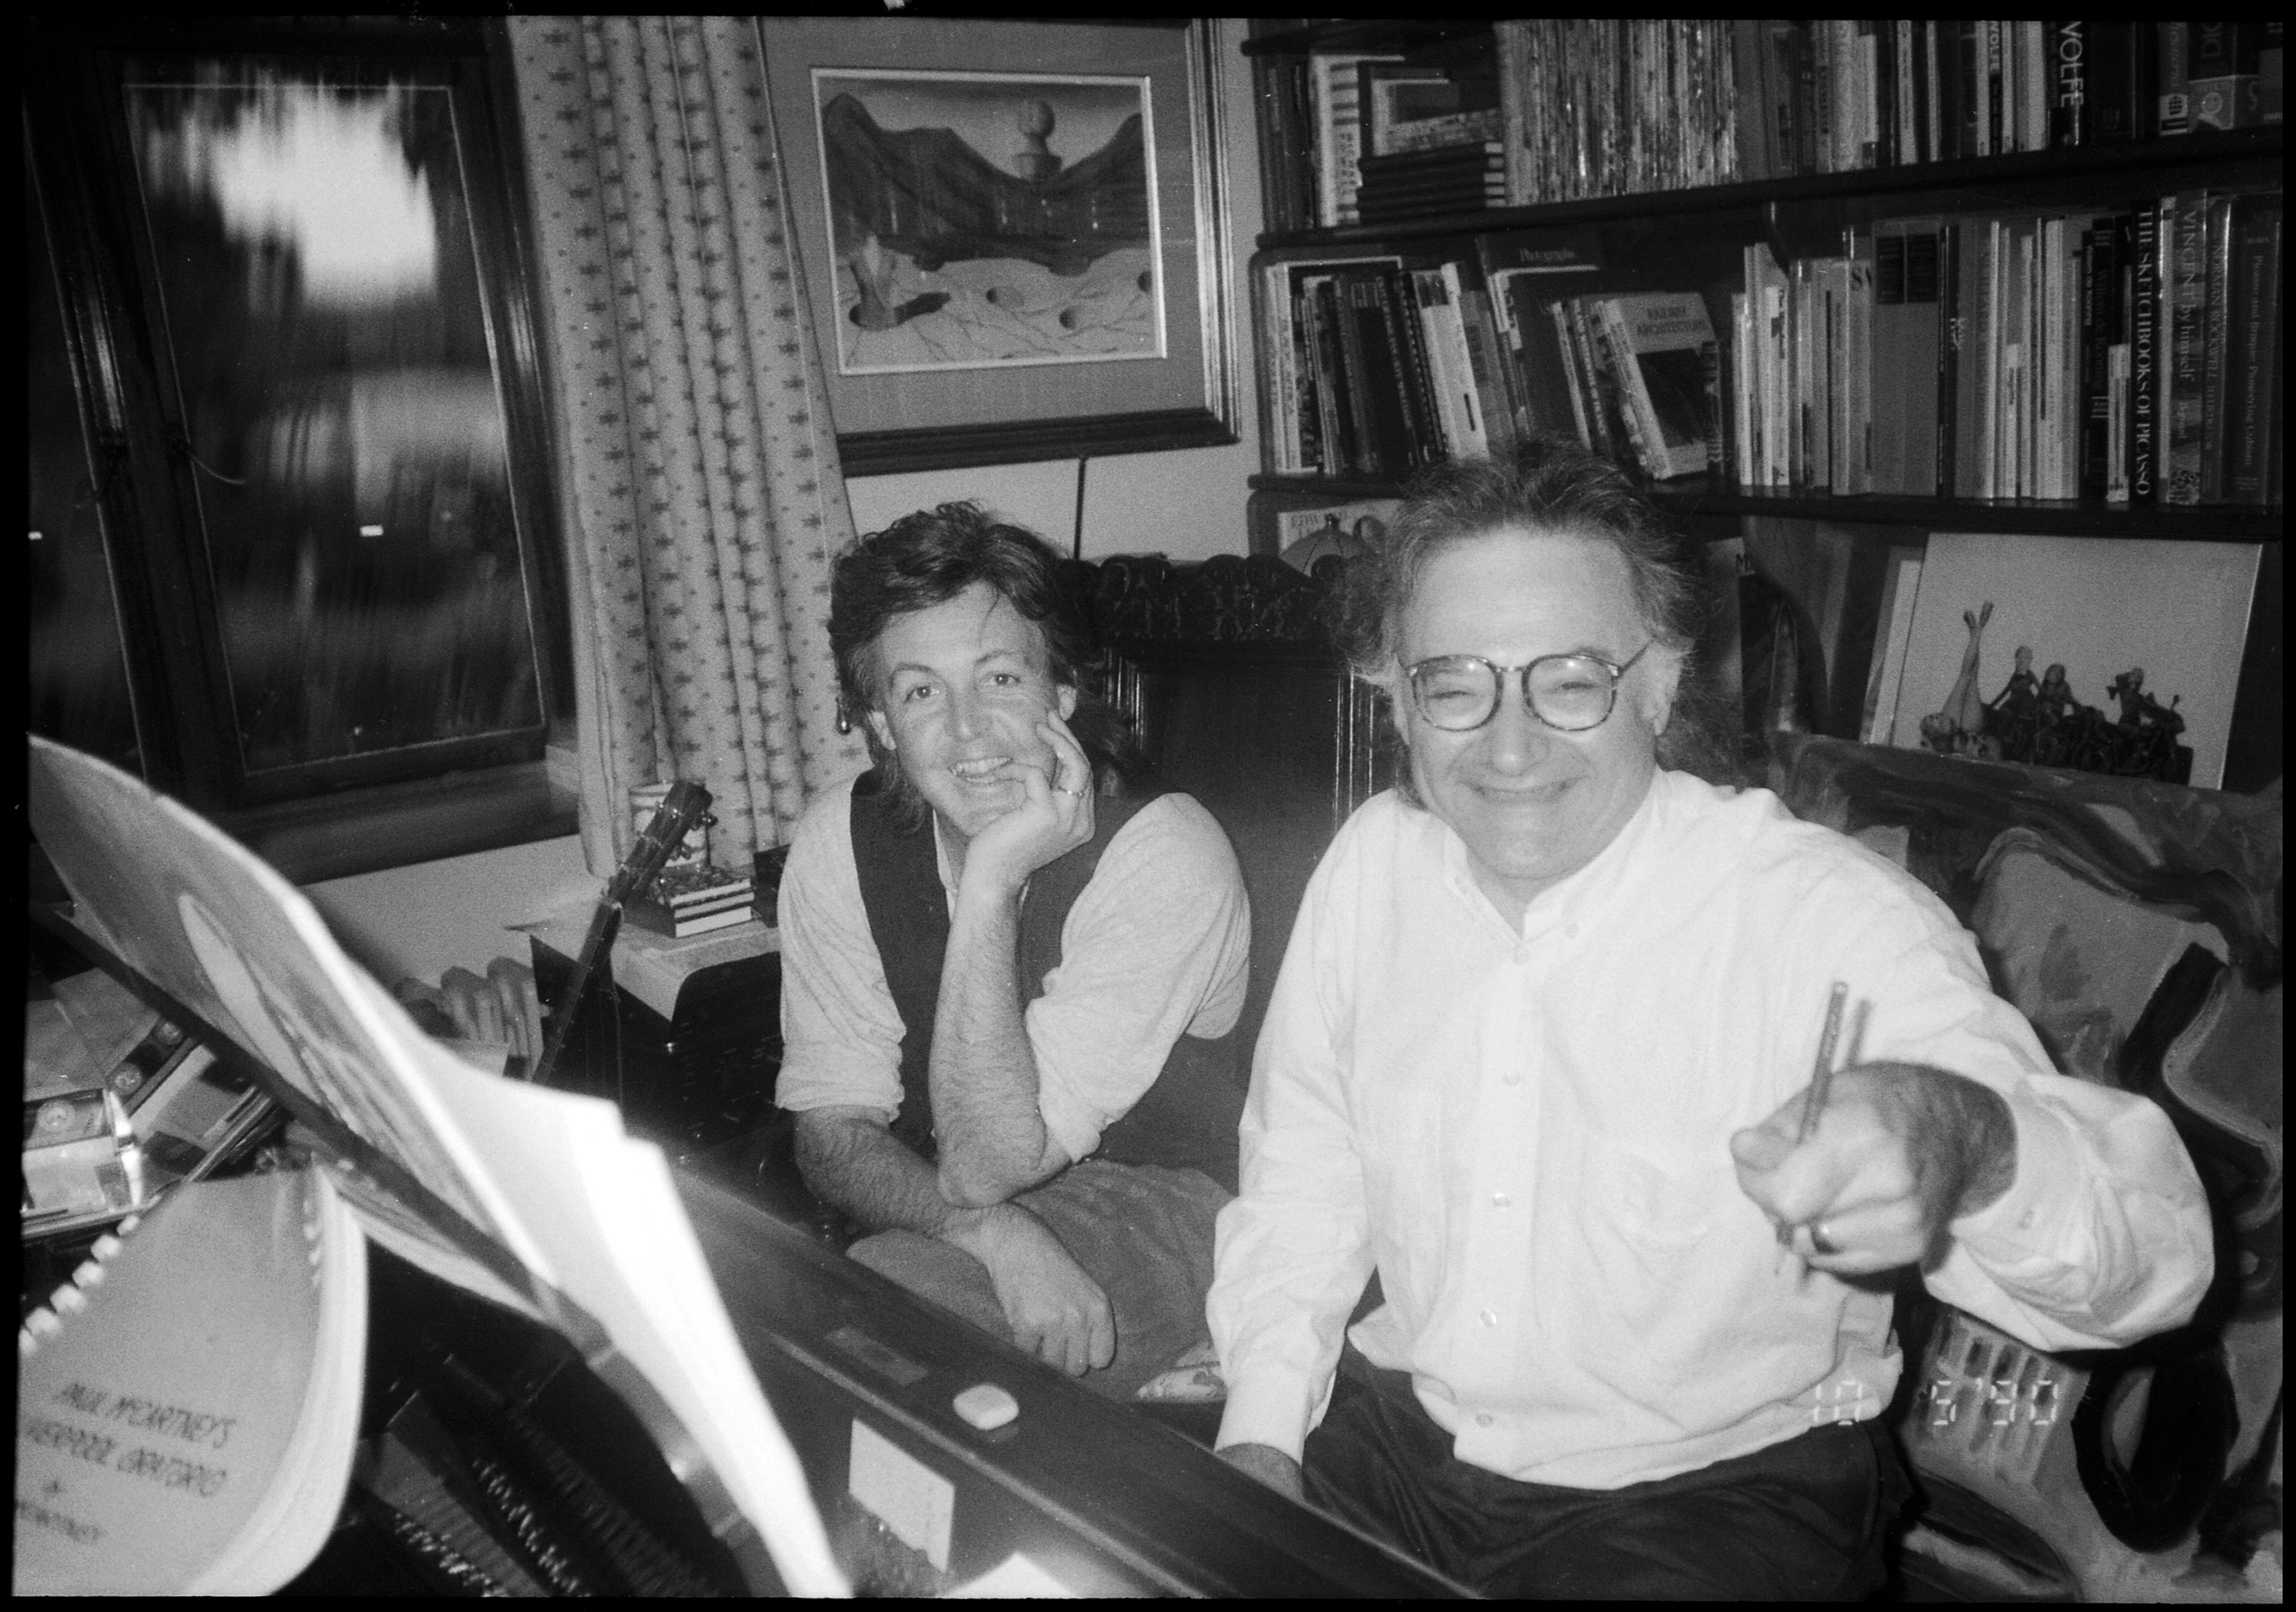 Paul with composer Carl Davis at the piano